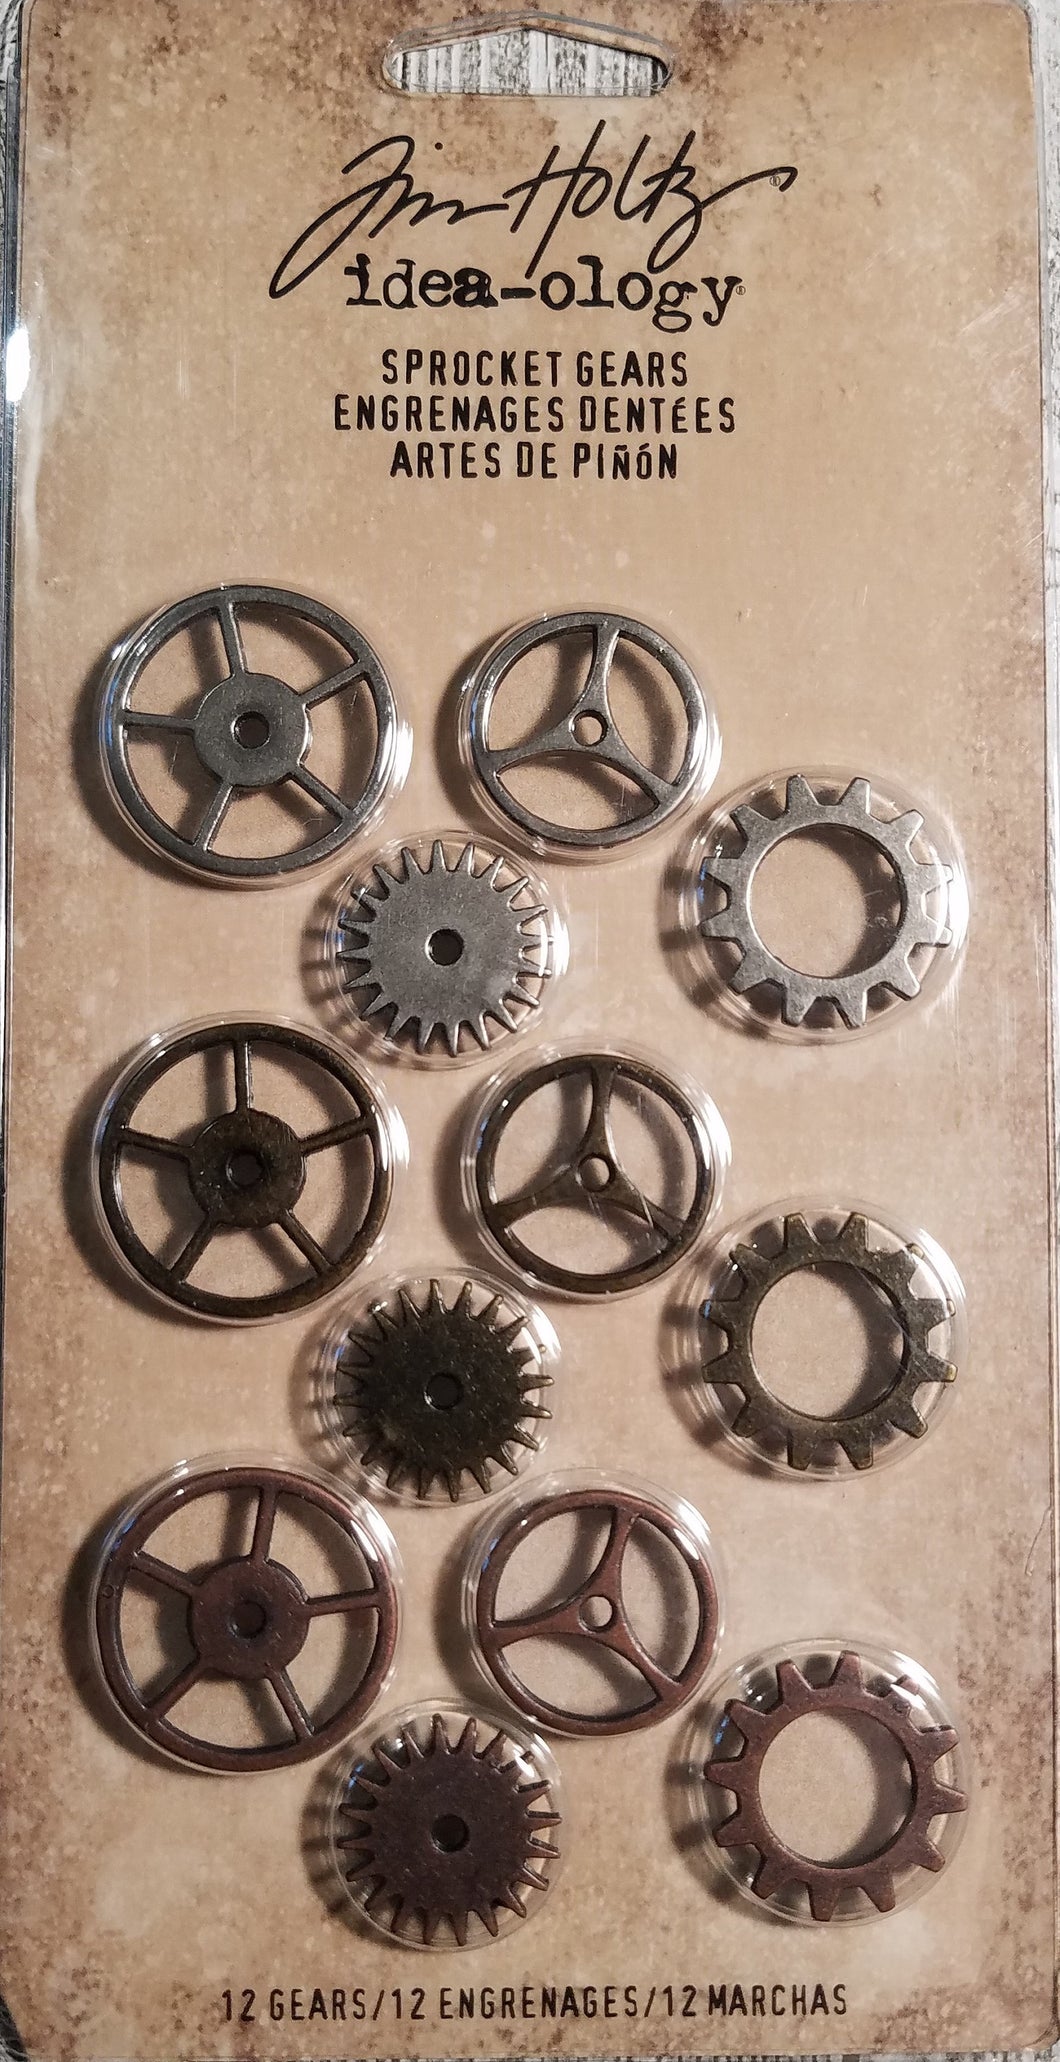 Tim Holtz Idea-ology: Sprocket Gears - TH92691 - 12 pieces - Mixed Media Assemblage Art Metal Steampunk Watch Parts